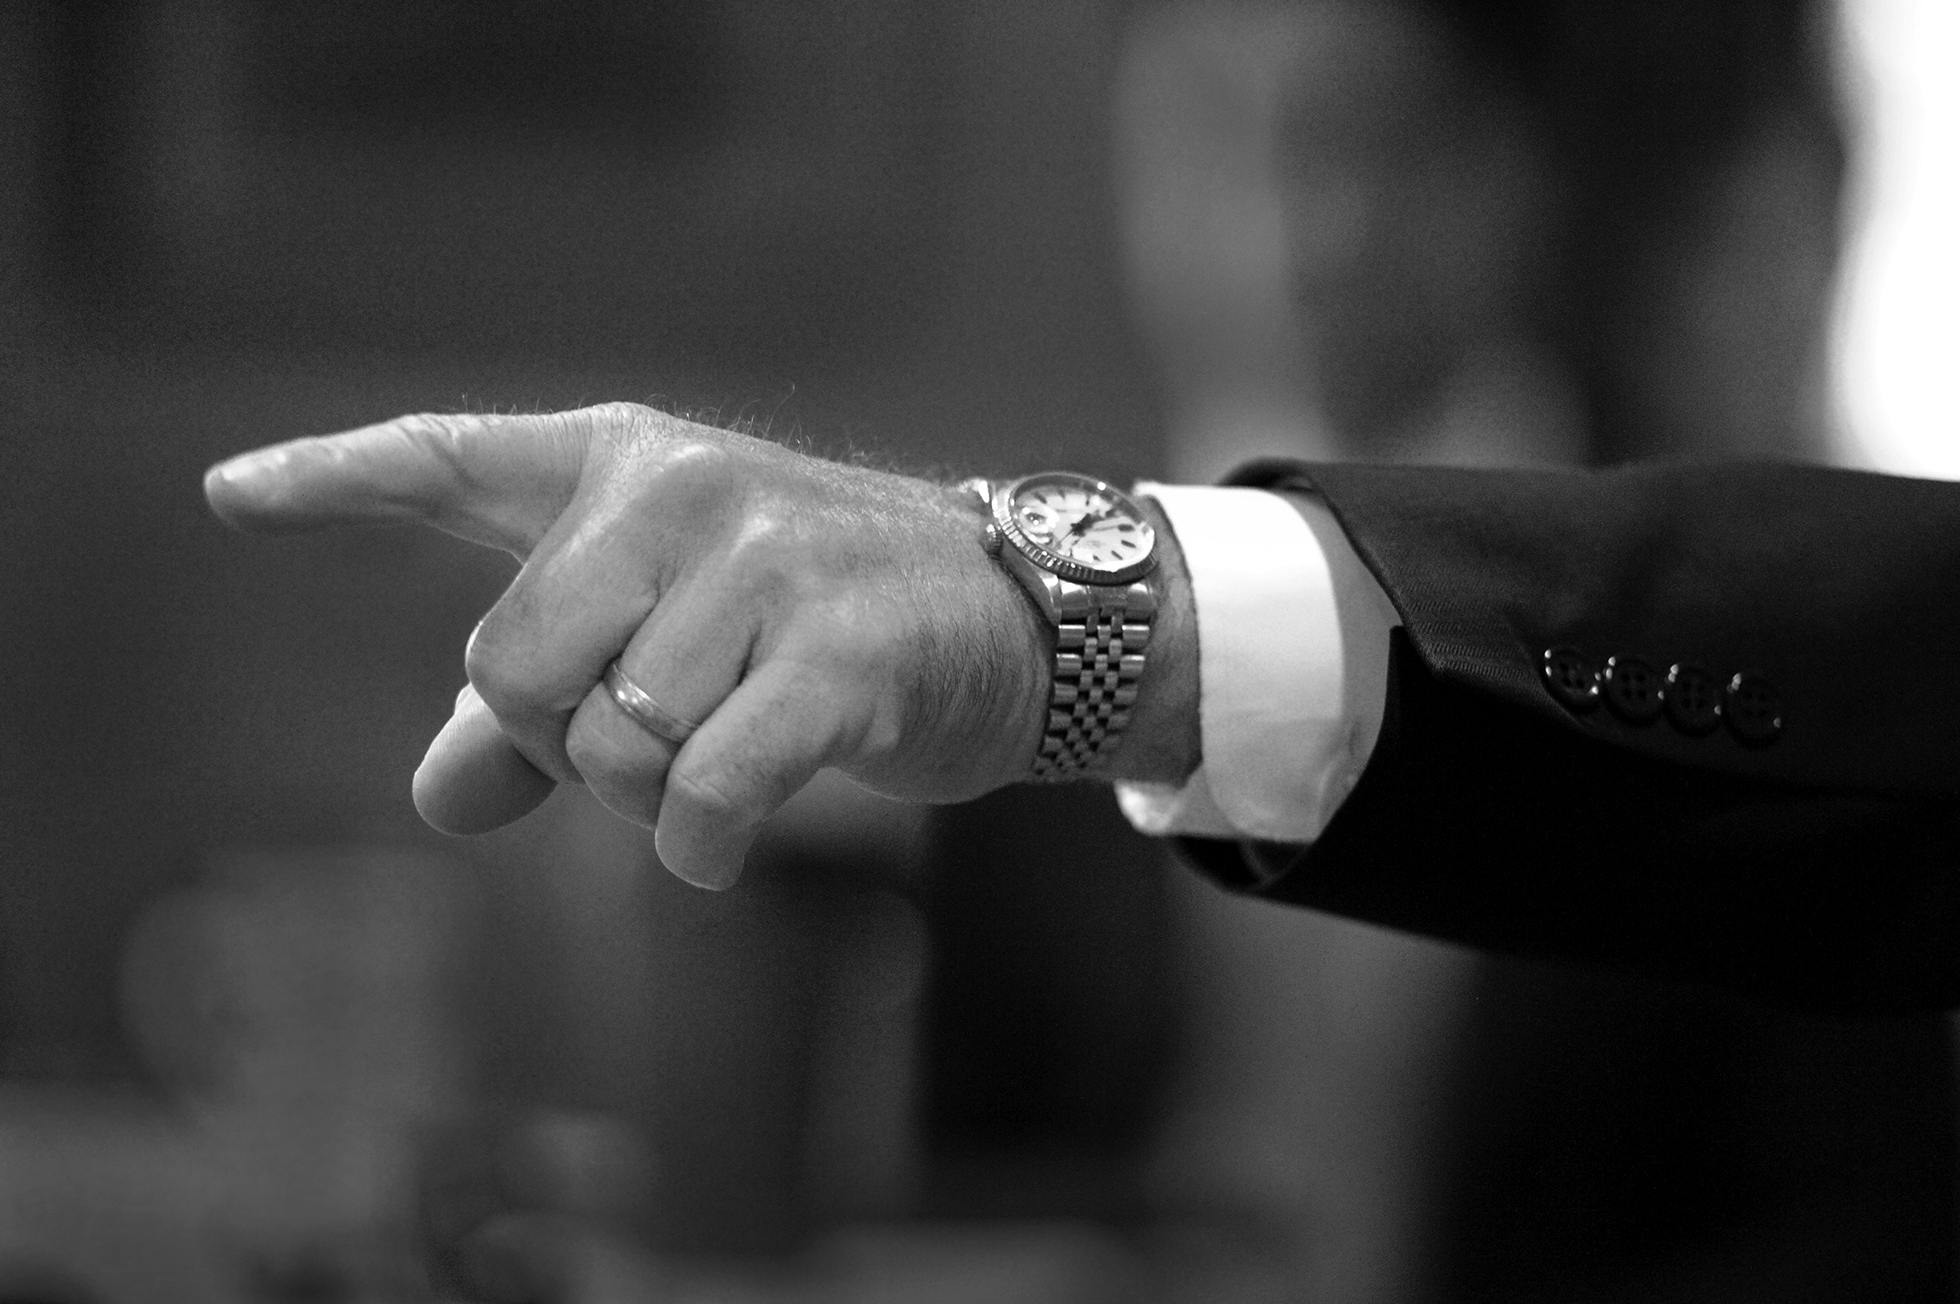 A man’s left forearm is extended as he points his index finger. A wedding band and watch face are visible, as is the sleeve of a suit coat with a white shirt cuff peeking out.